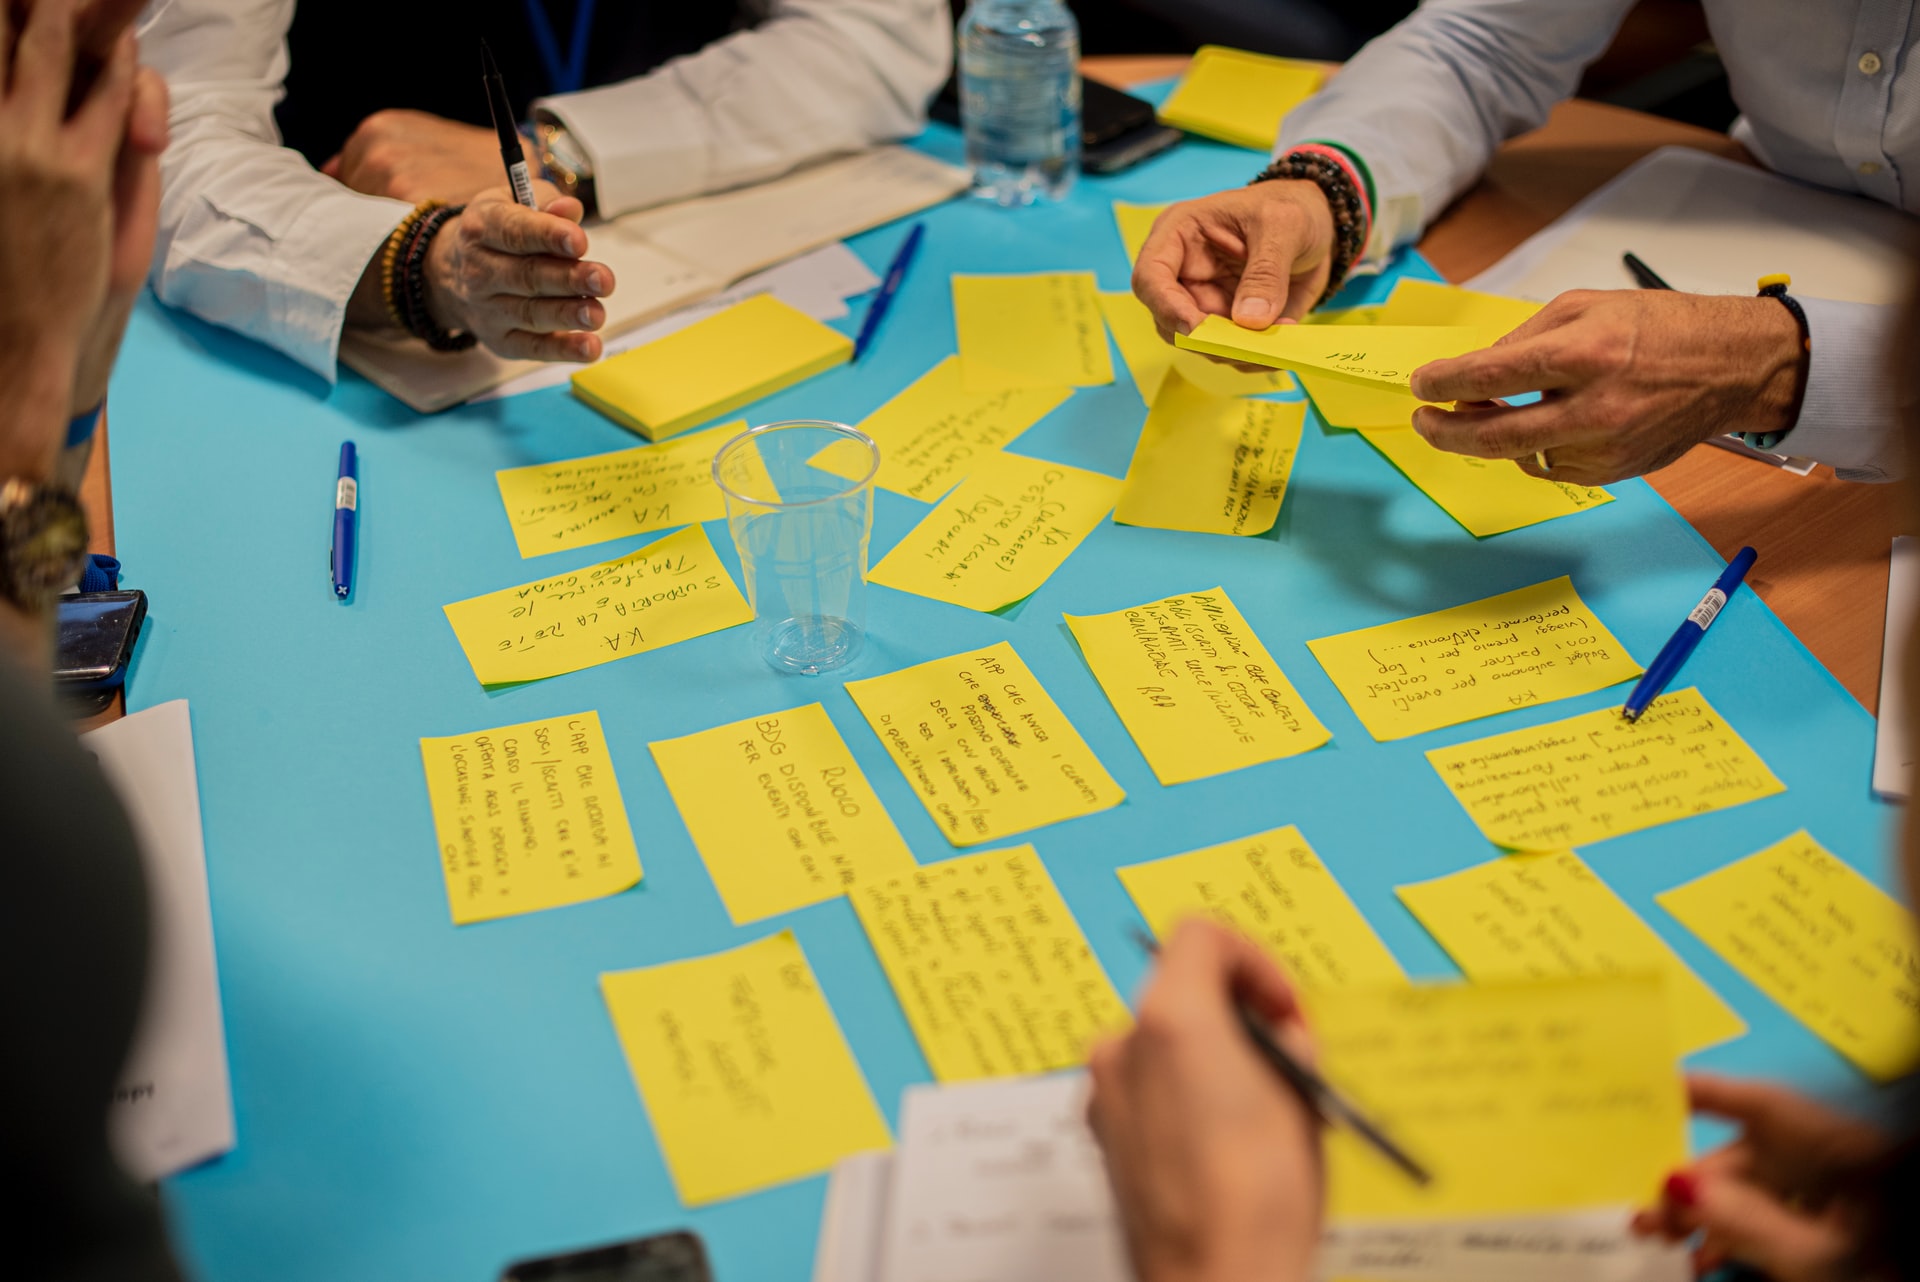 Multiple people writing on yellow notes, with multiple yellow notes already laid out on the table